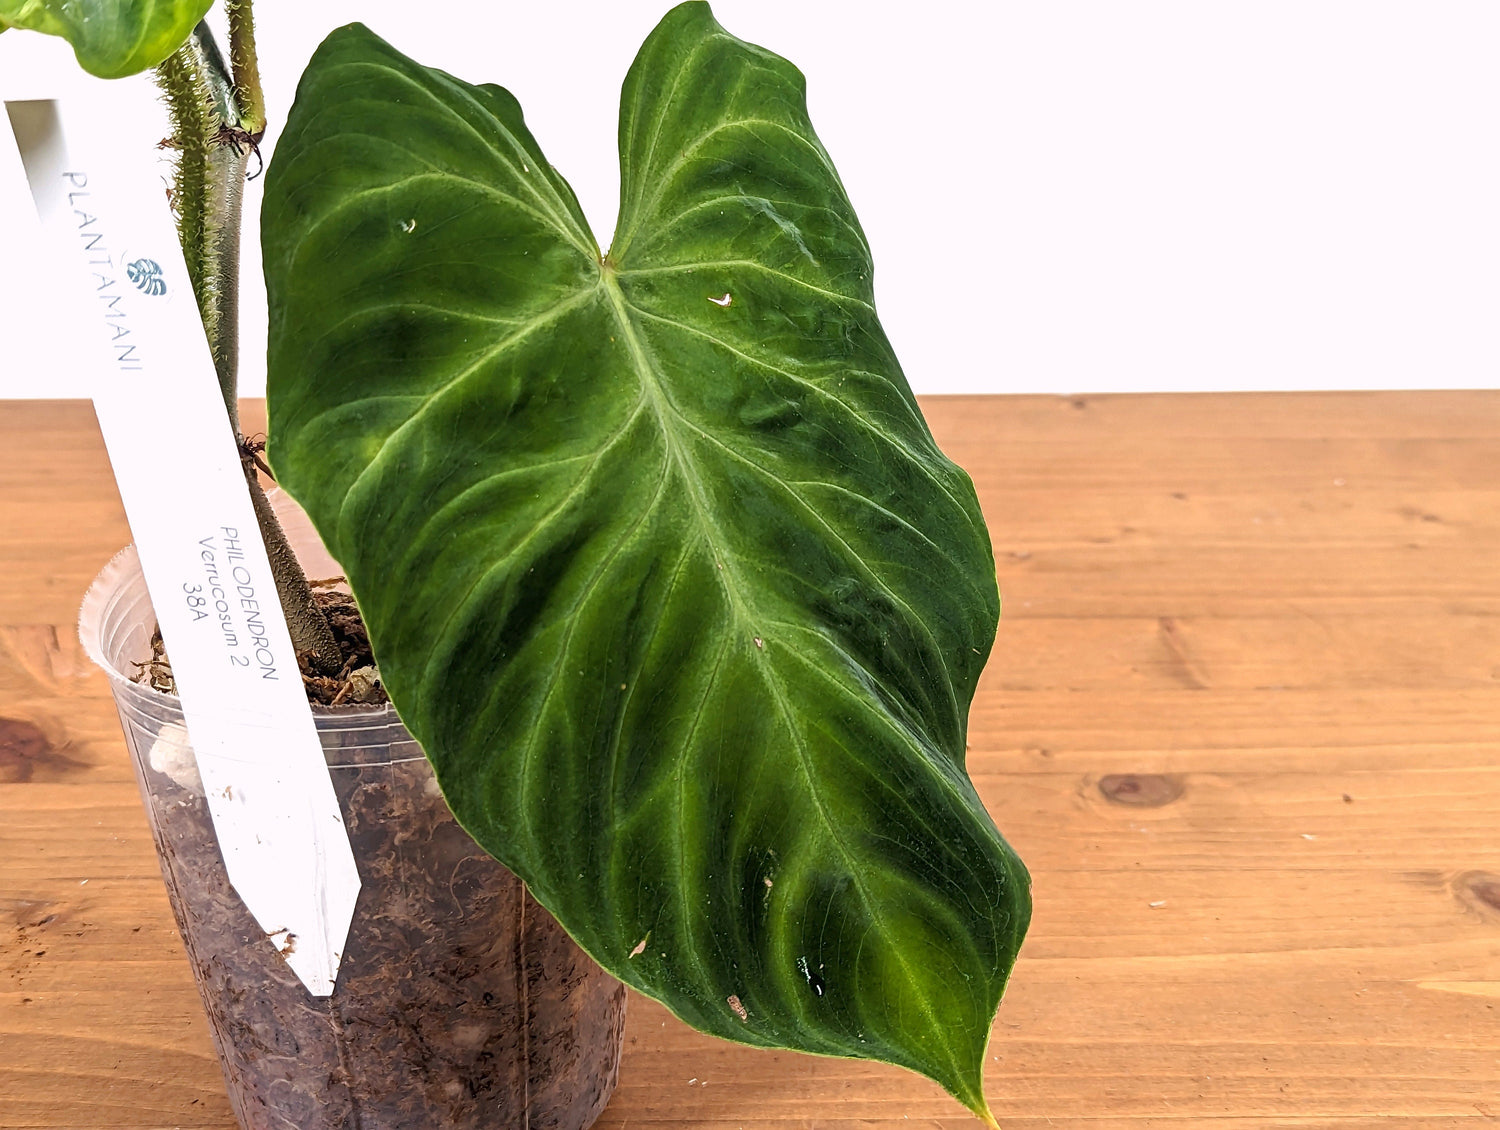 Philodendron verrucosum 2 approx 12&quot; tall - Live Climbing Tropical Houseplant